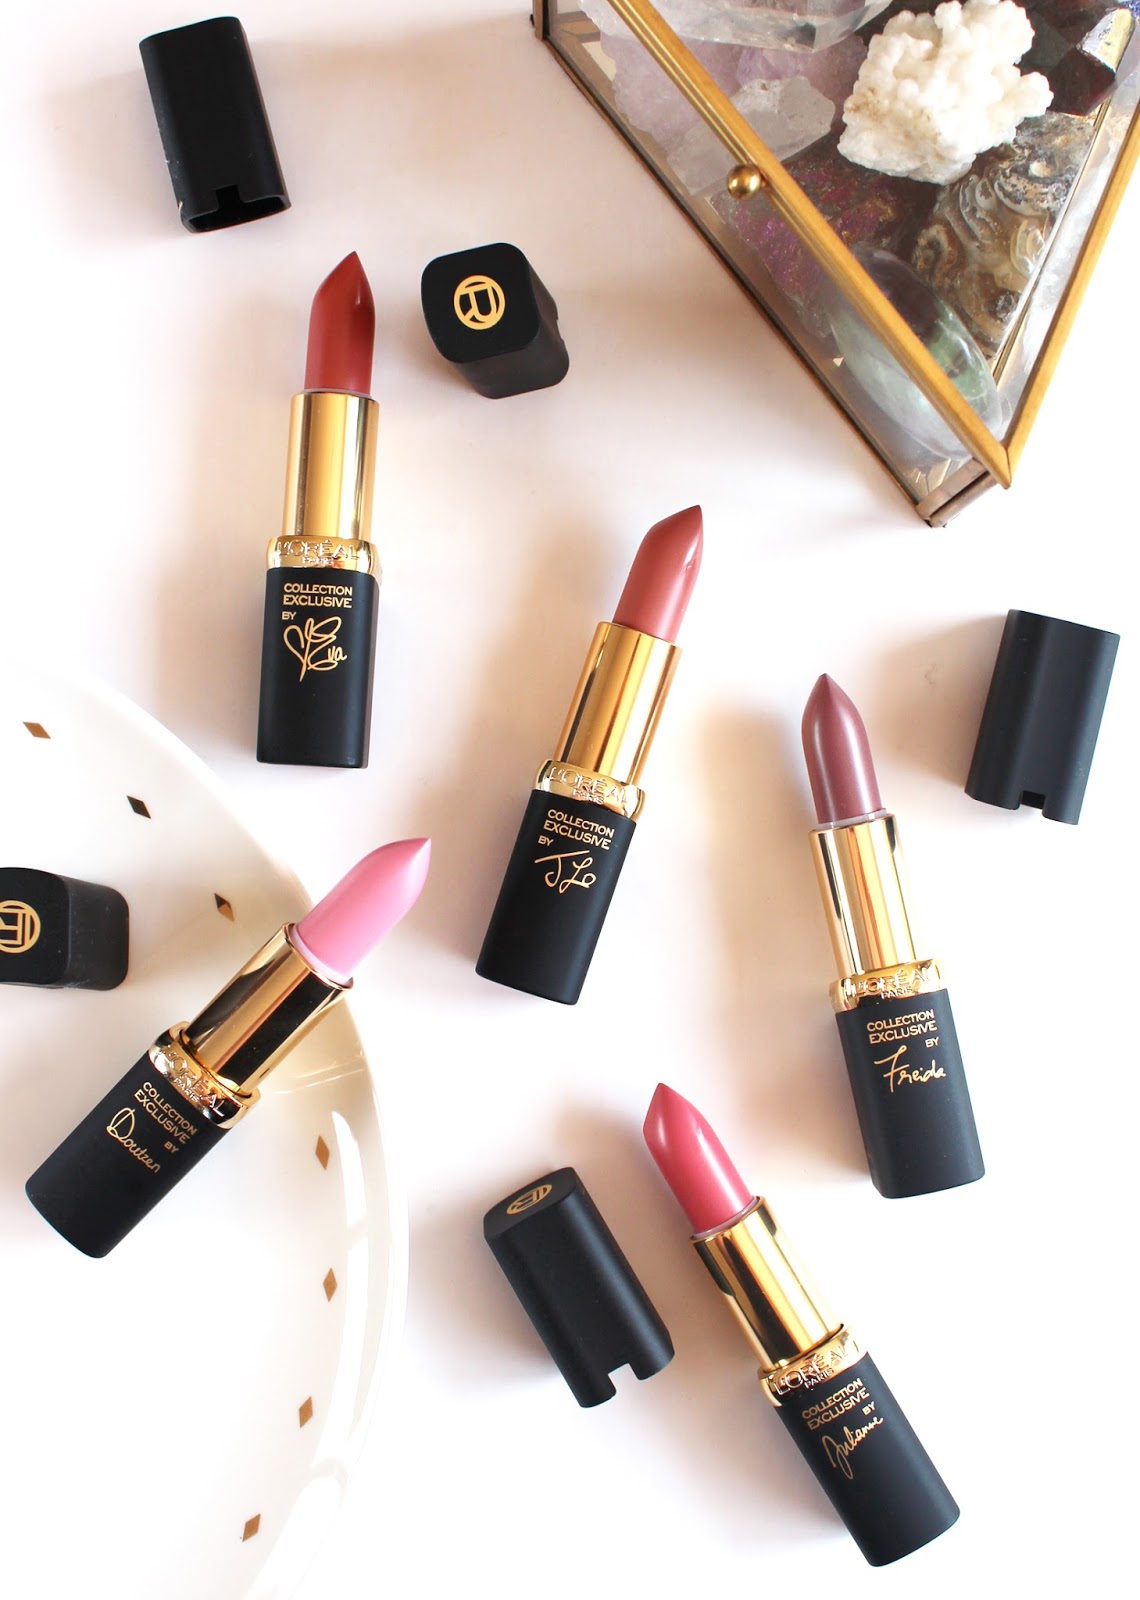 L'OREAL PARIS | Collection Exclusive Nudes Lipstick Collection - Review + Swatches